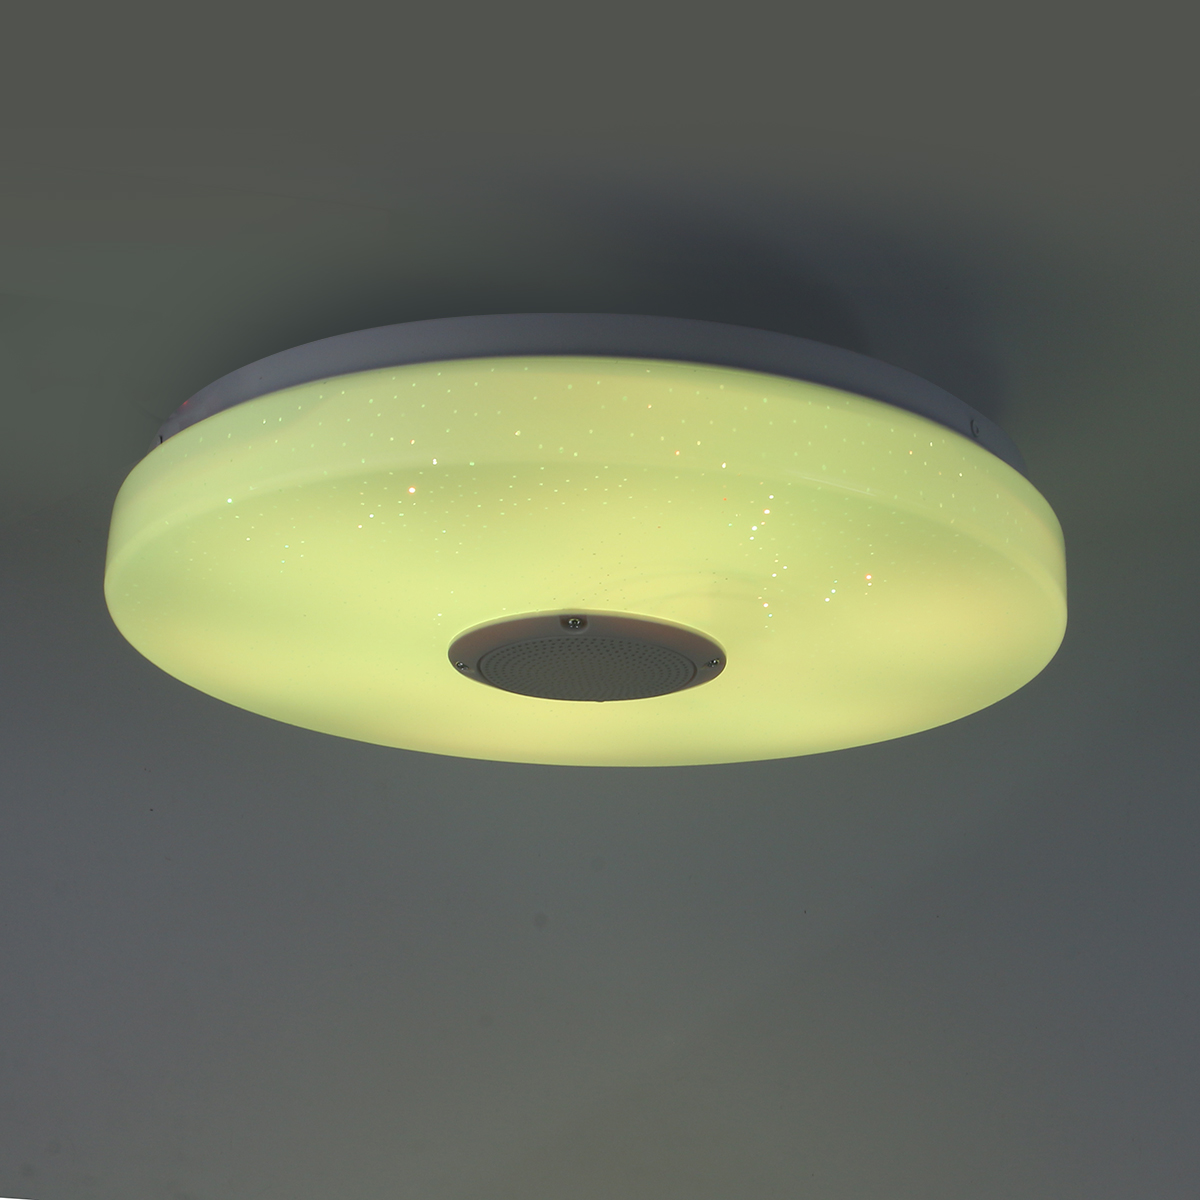 33cm-LED-Ceiling-Lights-Colorful-DownLight-Lamp-Smart-Control-bluetooth-WIFI-APP-Home-1722354-9